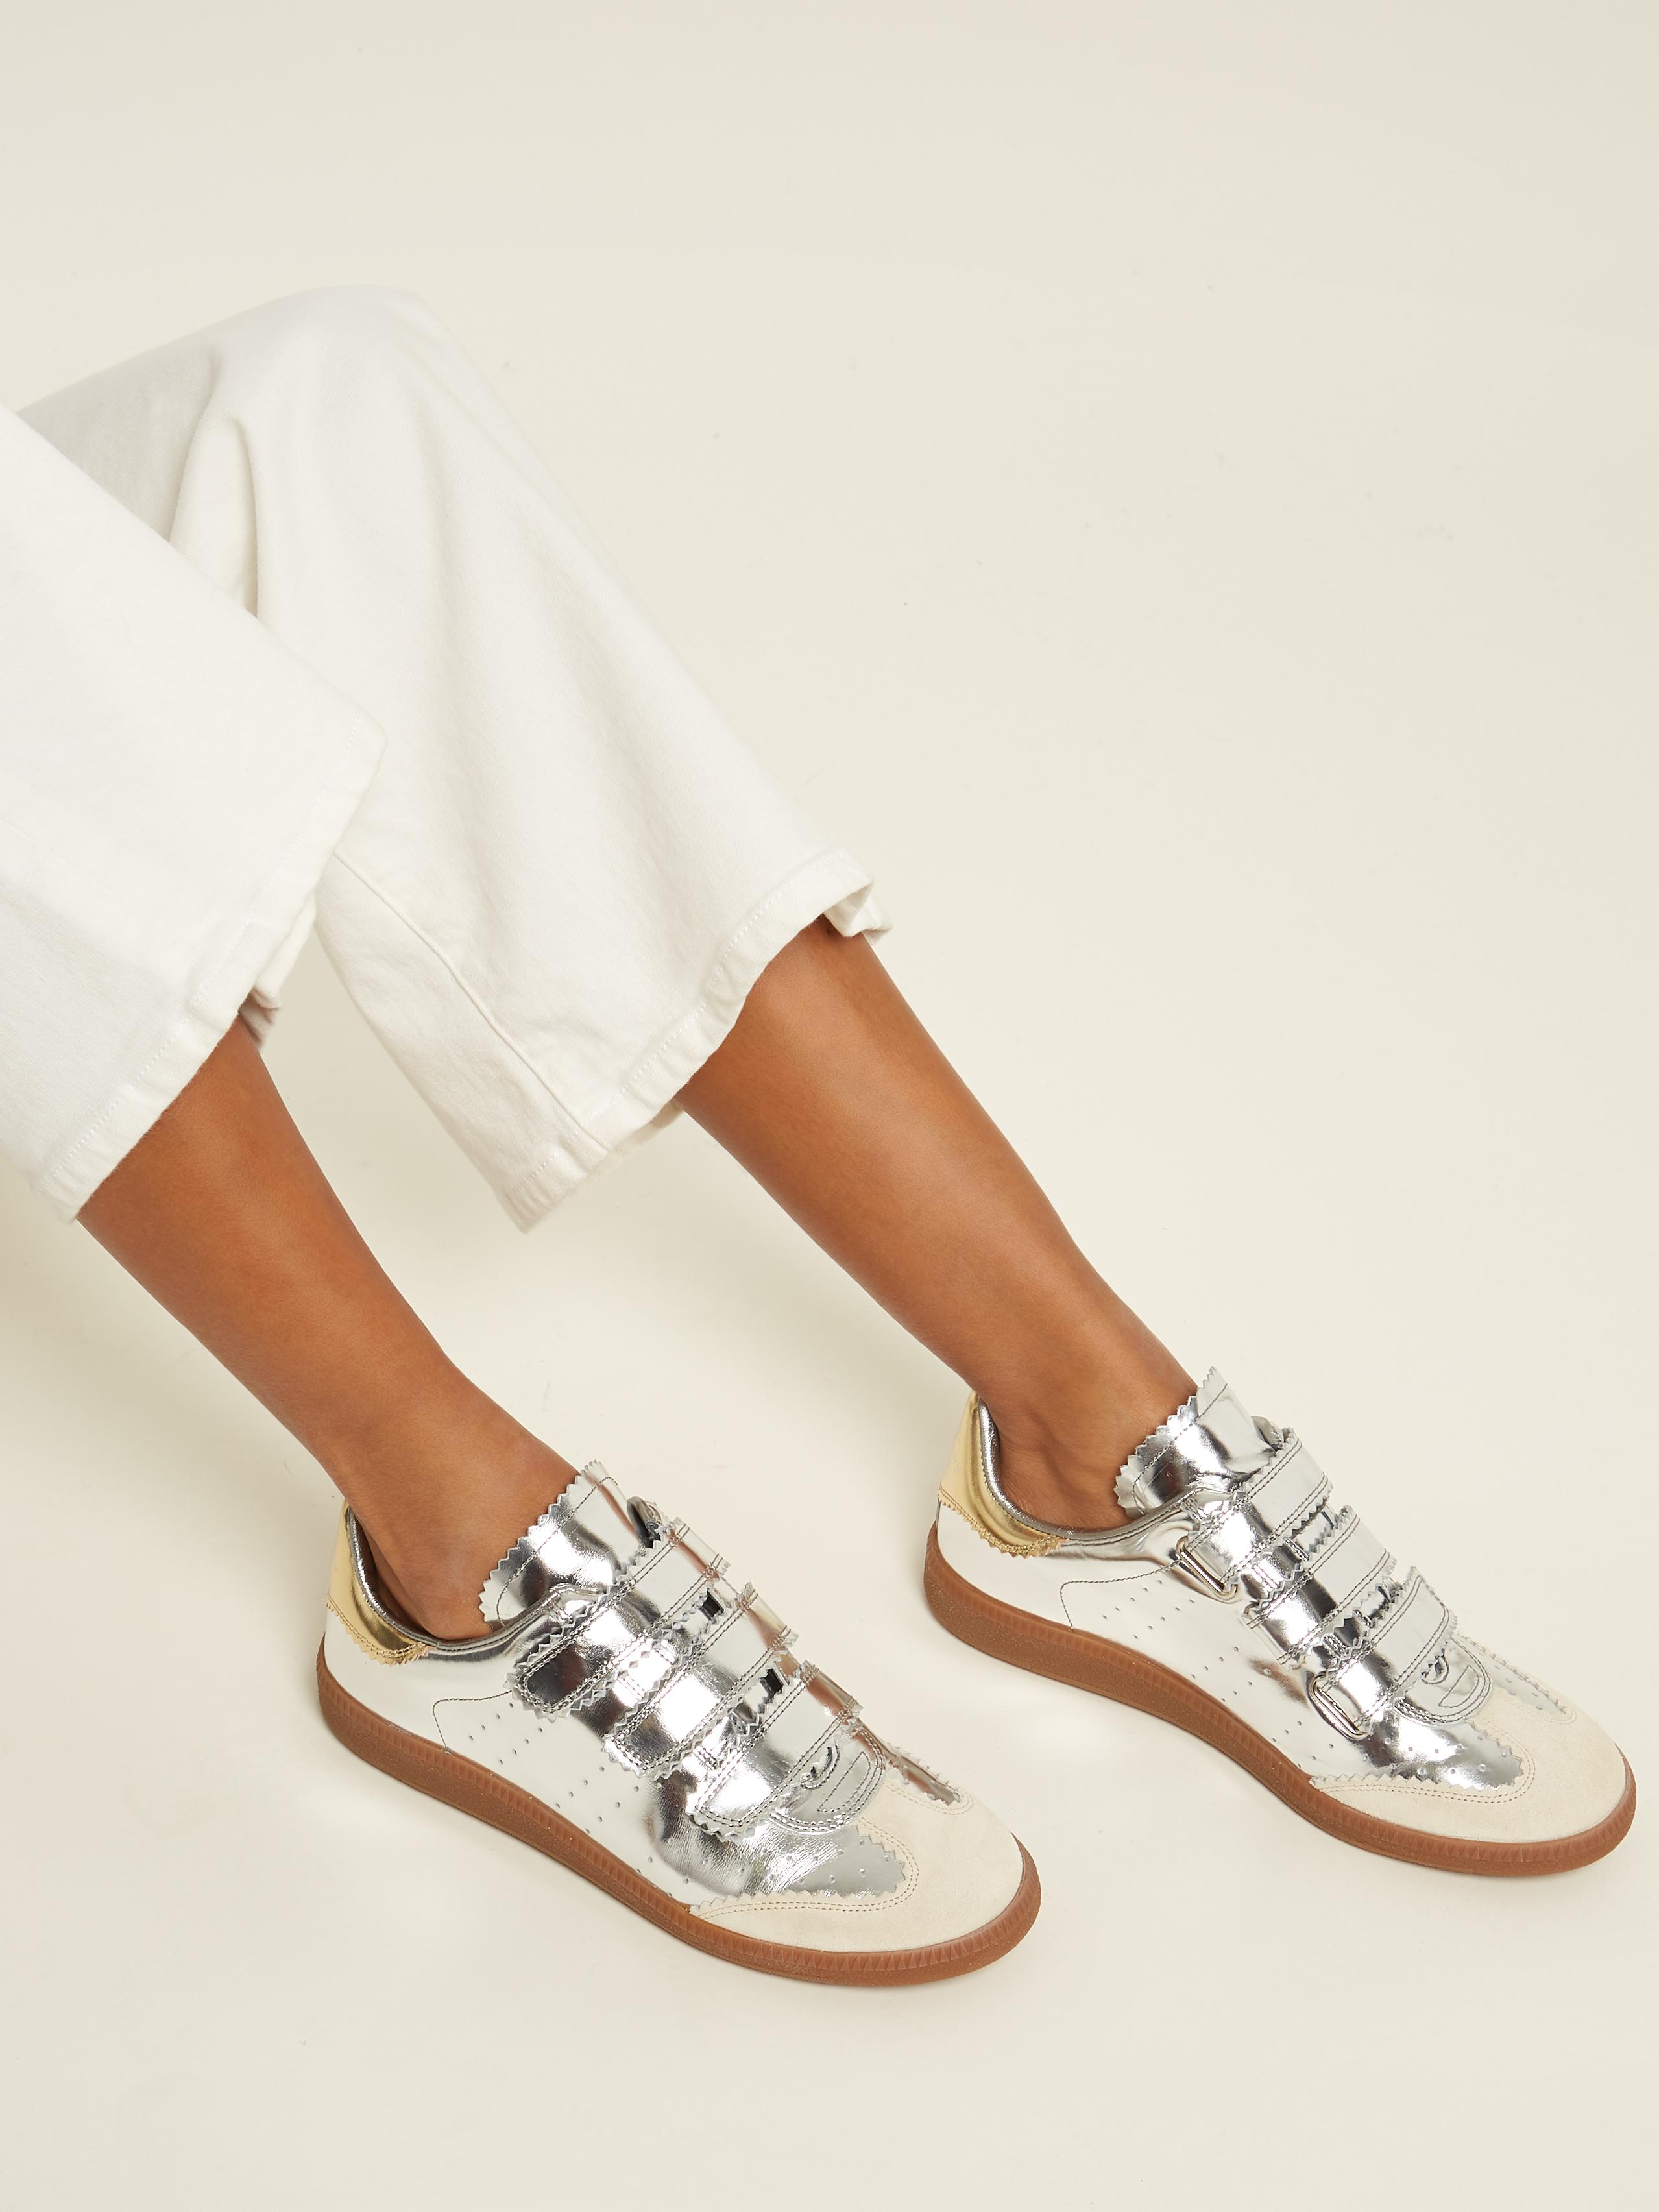 Isabel Marant Beth Pinked-edge Low-top Leather Trainers in Metallic | Lyst